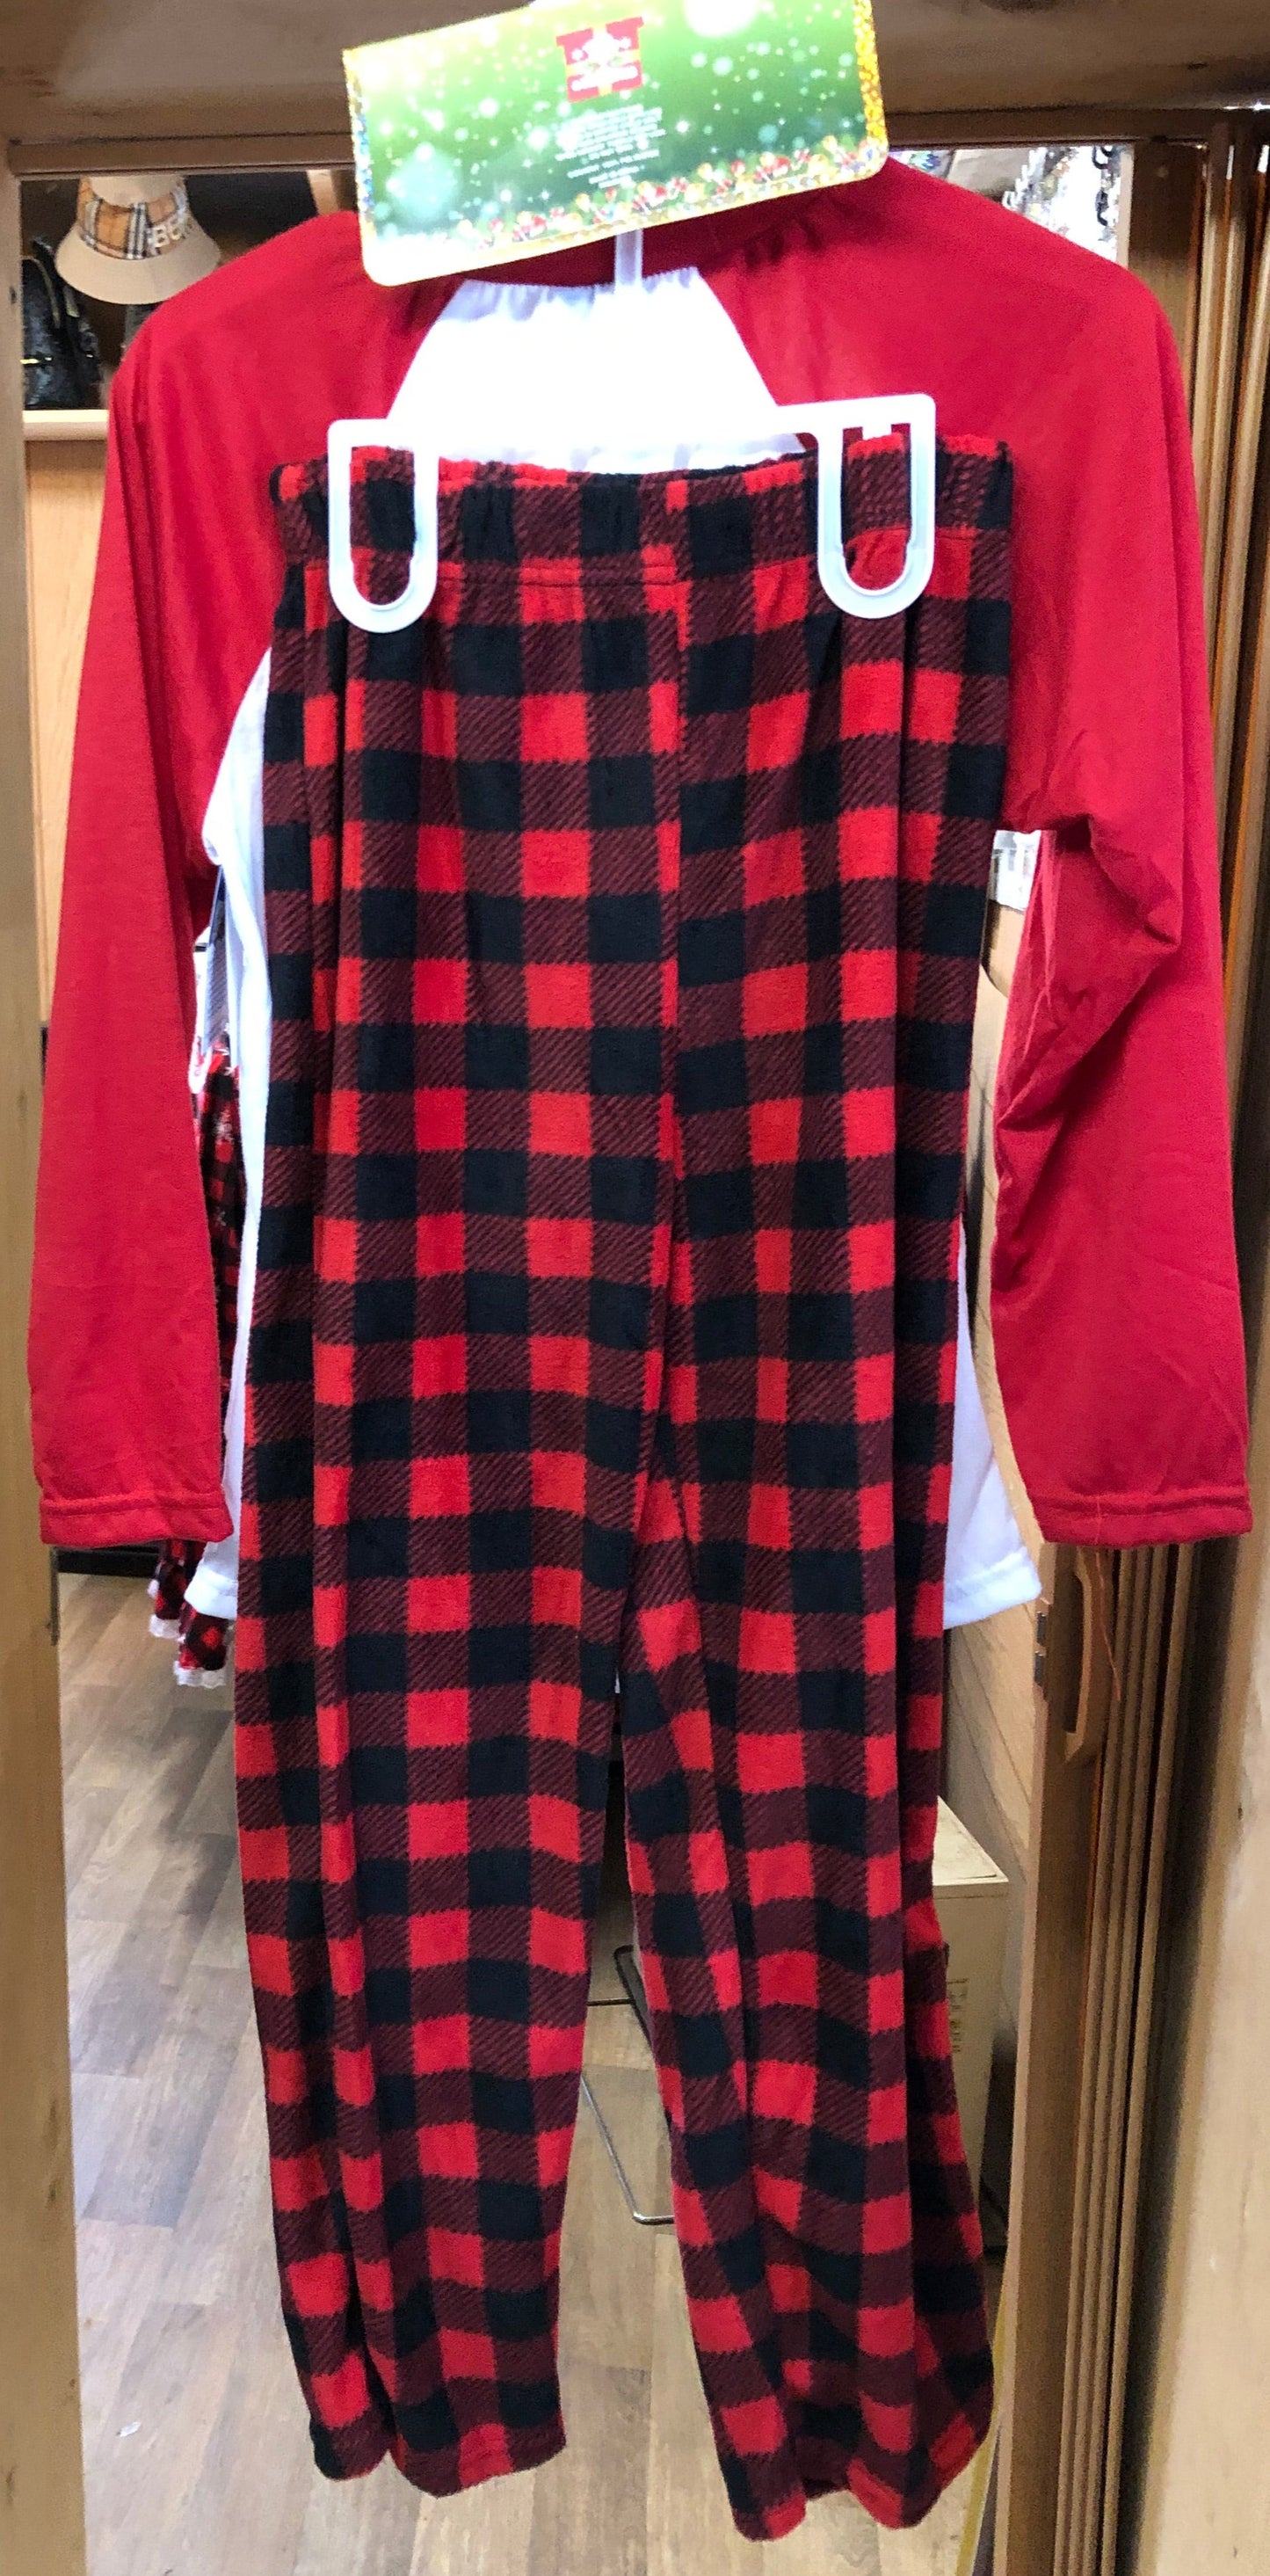 Boys Sleep Pajamas Matching Pants Size 10/12 "New Arrival" Just In For Christmas